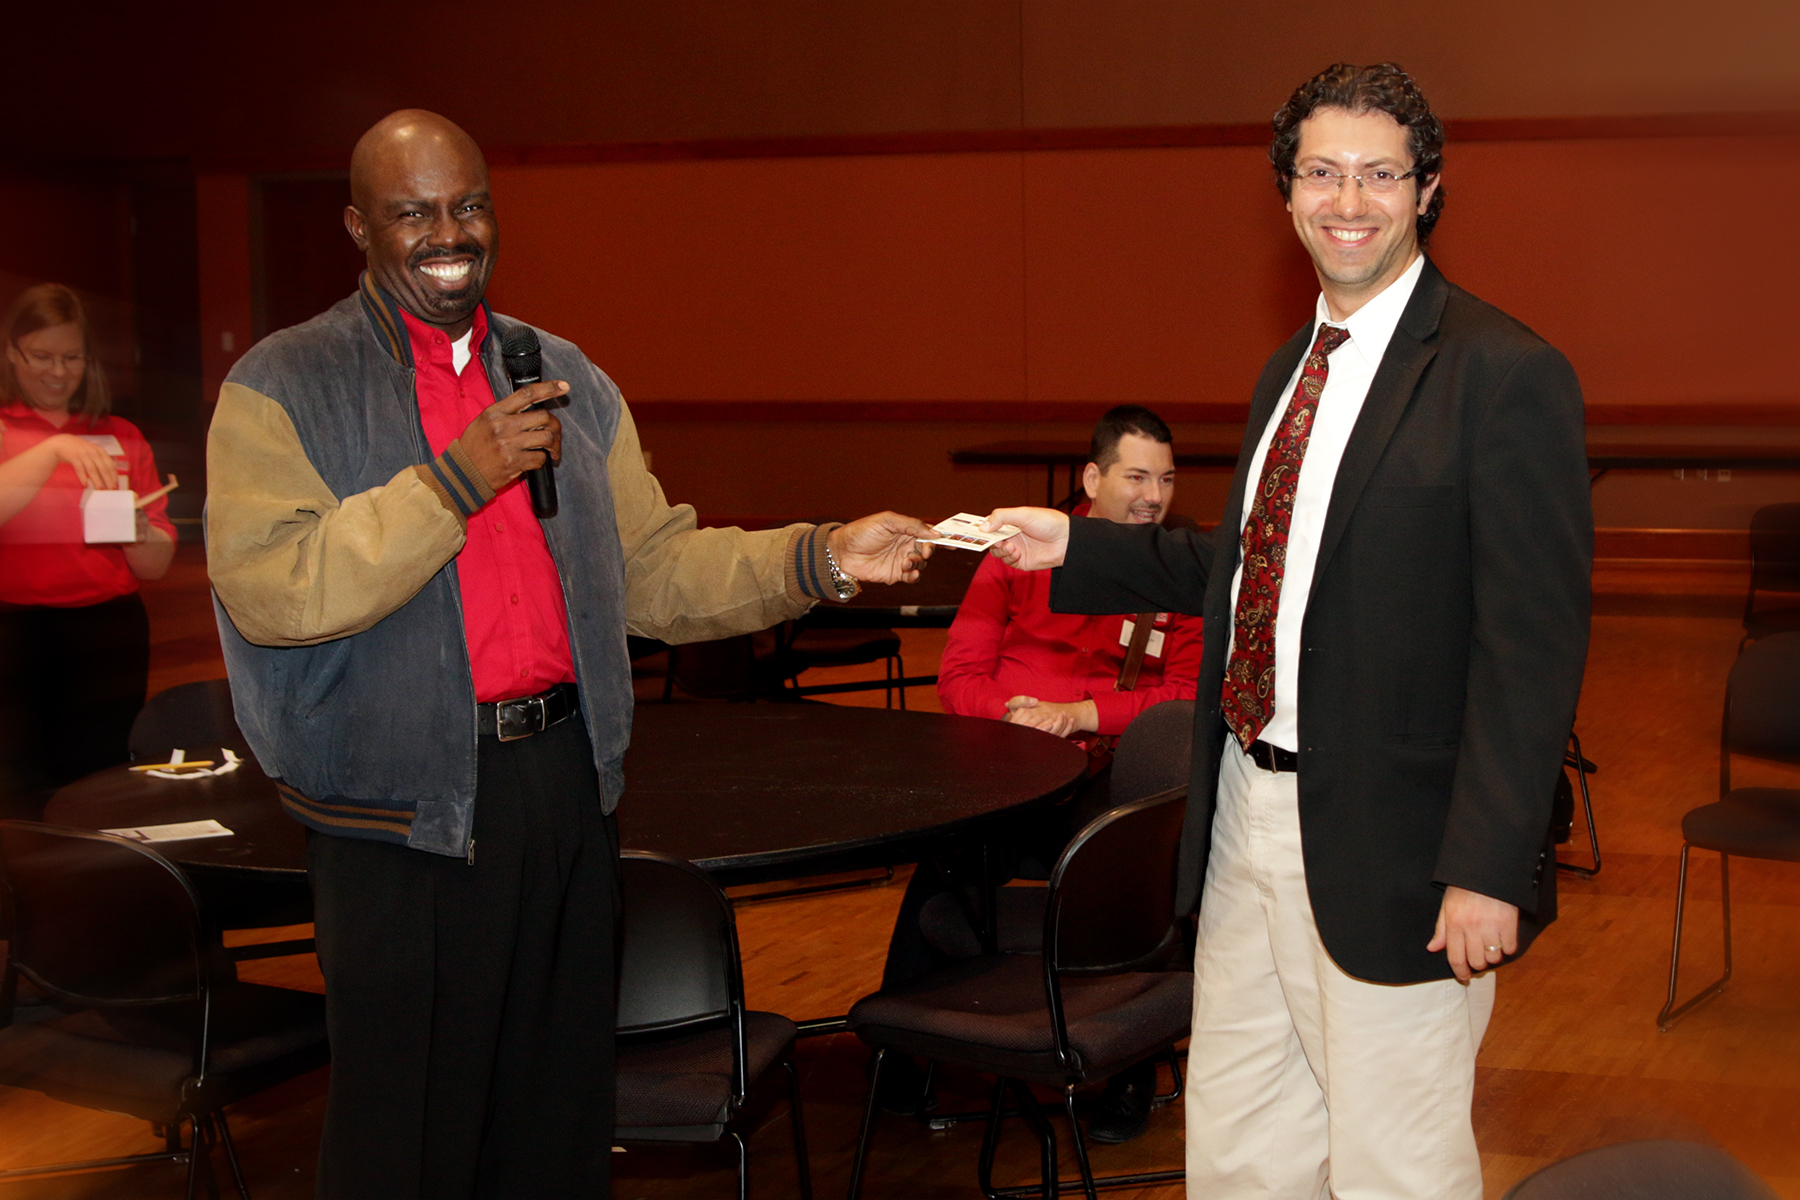 Faculty Center Director, Dr. Steve Leslie, handing out a prize to drawing winner